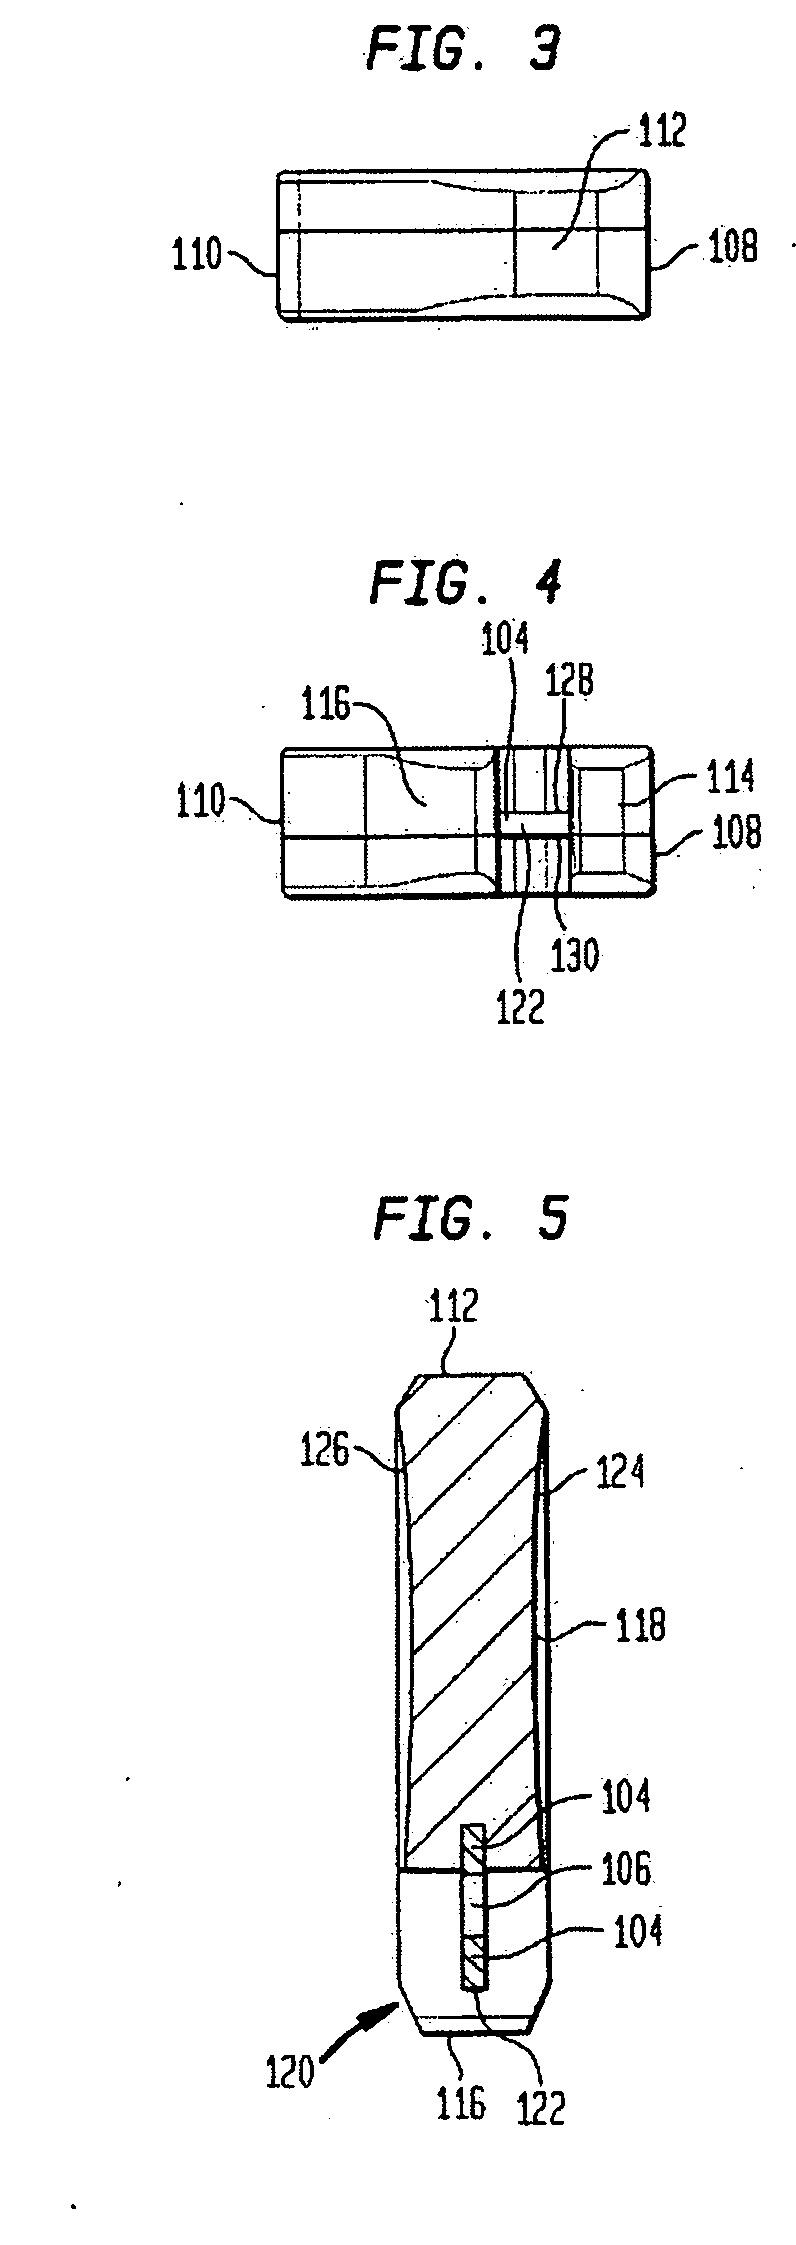 Trial implant and method of use